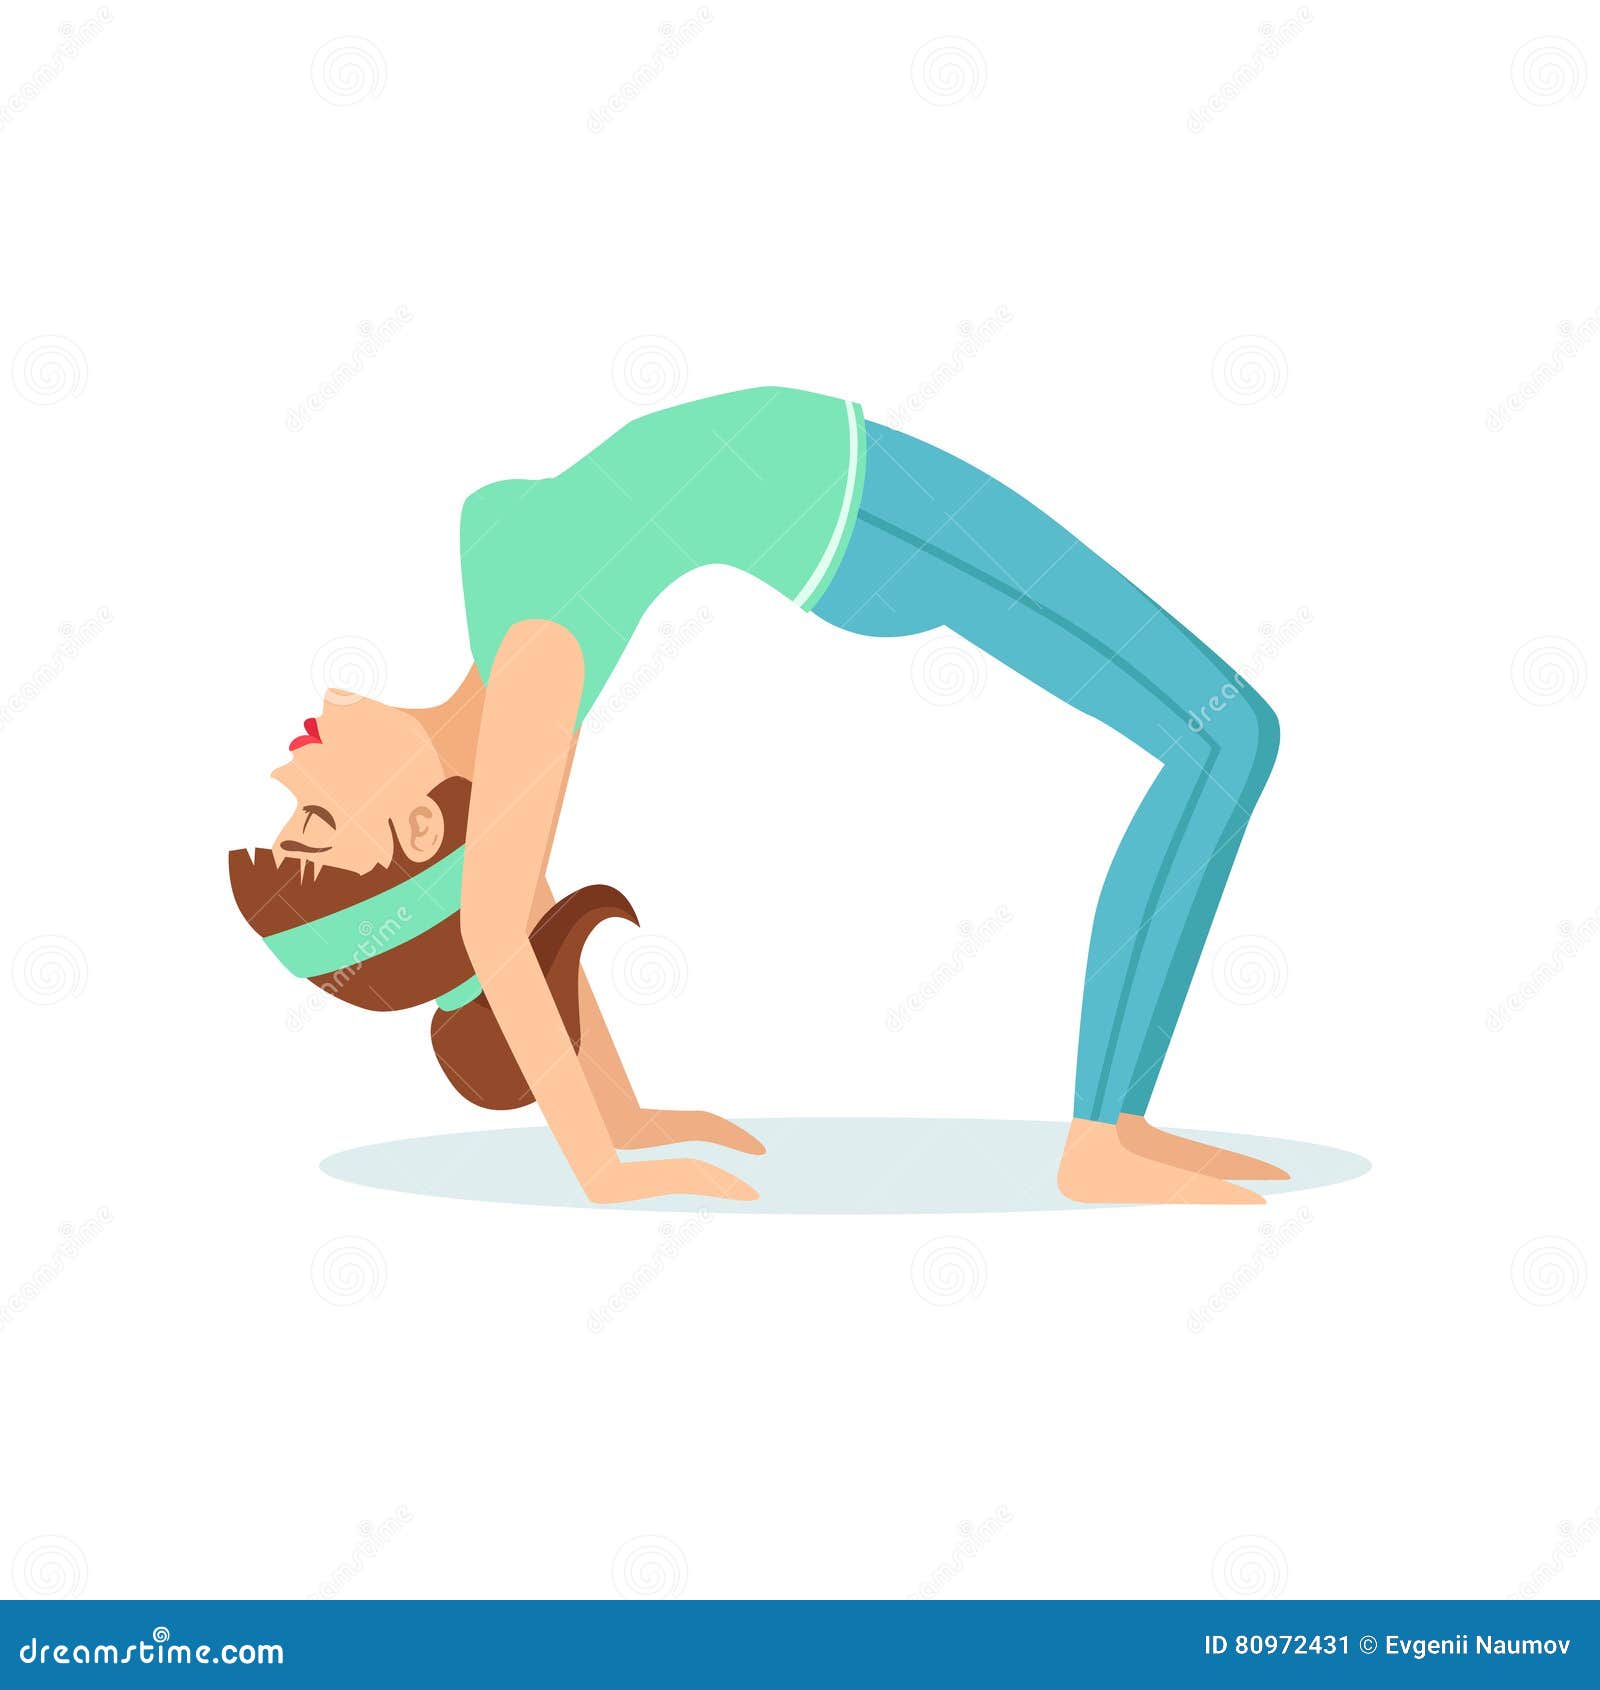 Chakrasana Cartoons, Illustrations & Vector Stock Images - 79 Pictures